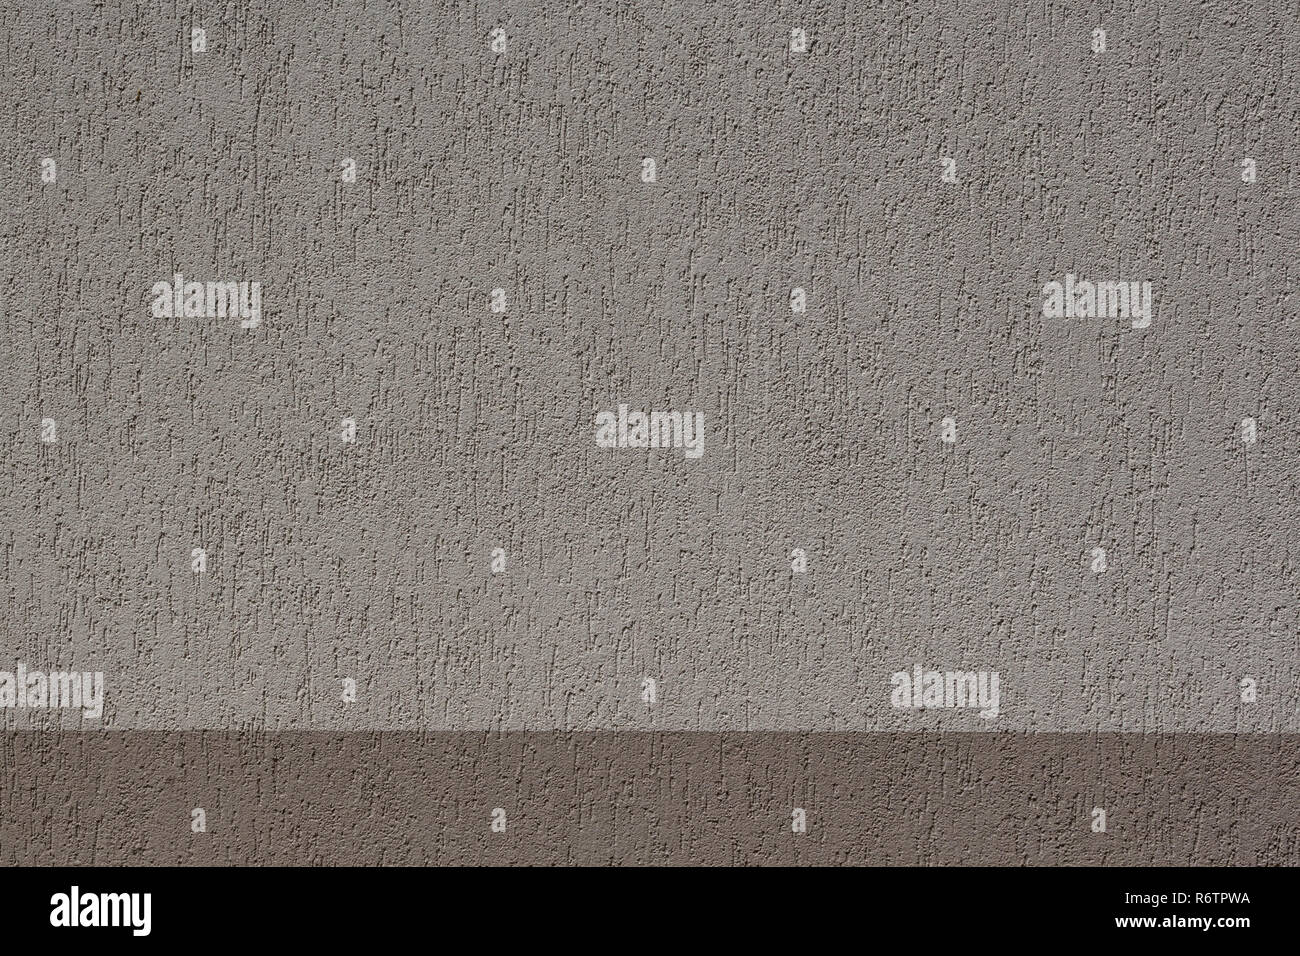 Concrete wall background texture for composing Stock Photo